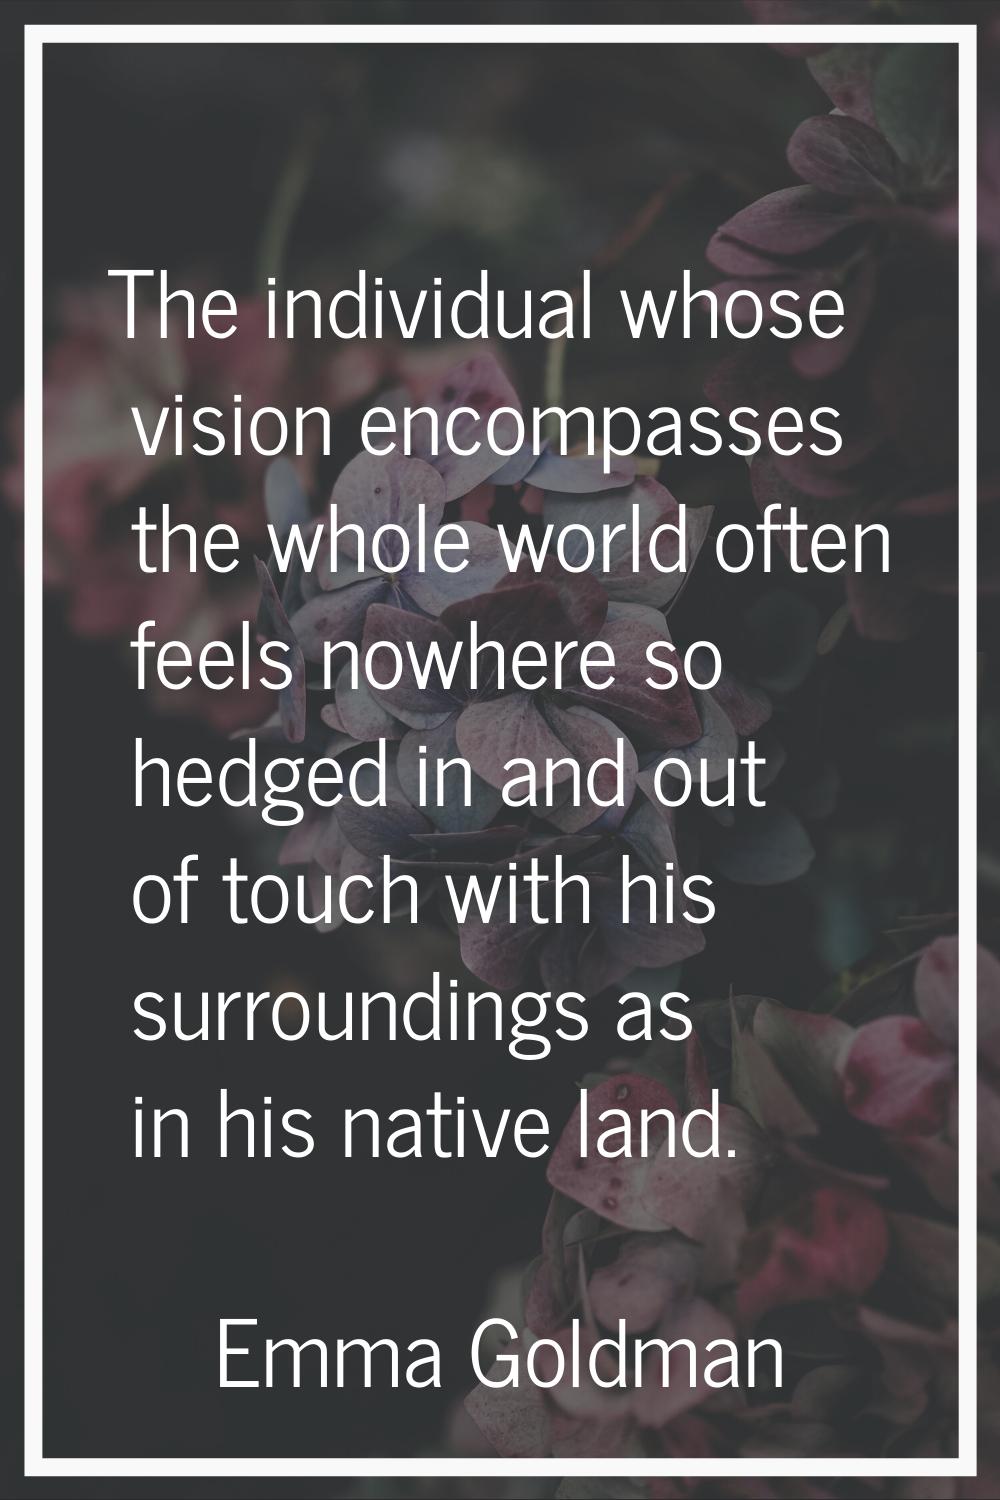 The individual whose vision encompasses the whole world often feels nowhere so hedged in and out of